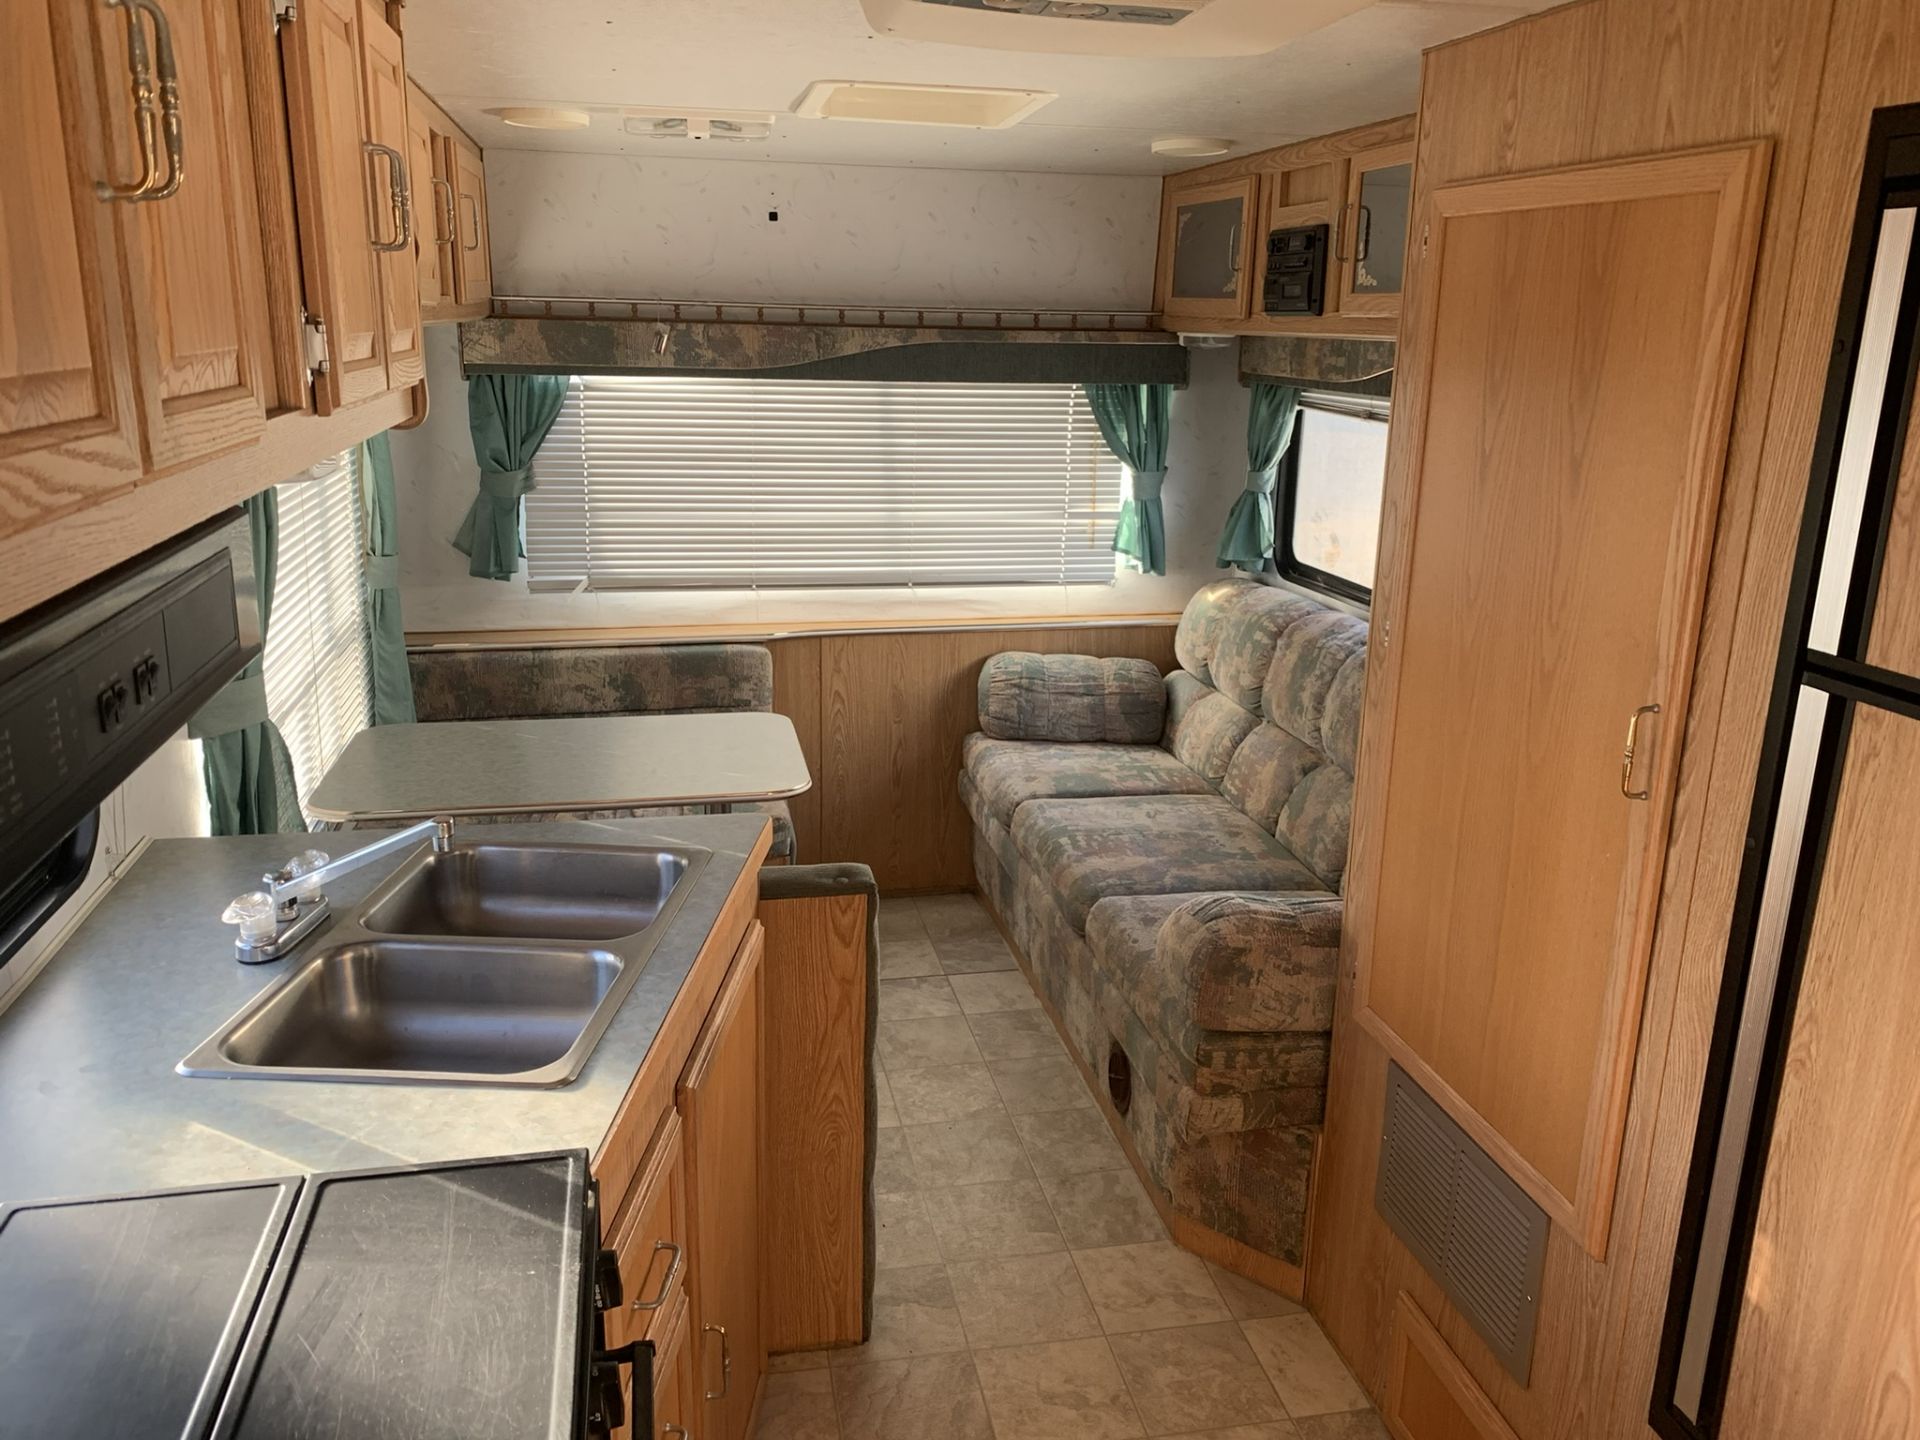 1996 TRAVELAIRE RUSTLER RW220 5TH WHEEL HOLIDAY TRAILER, FRONT QUEEN BED, REAR KITCHEN, AC - Image 7 of 13